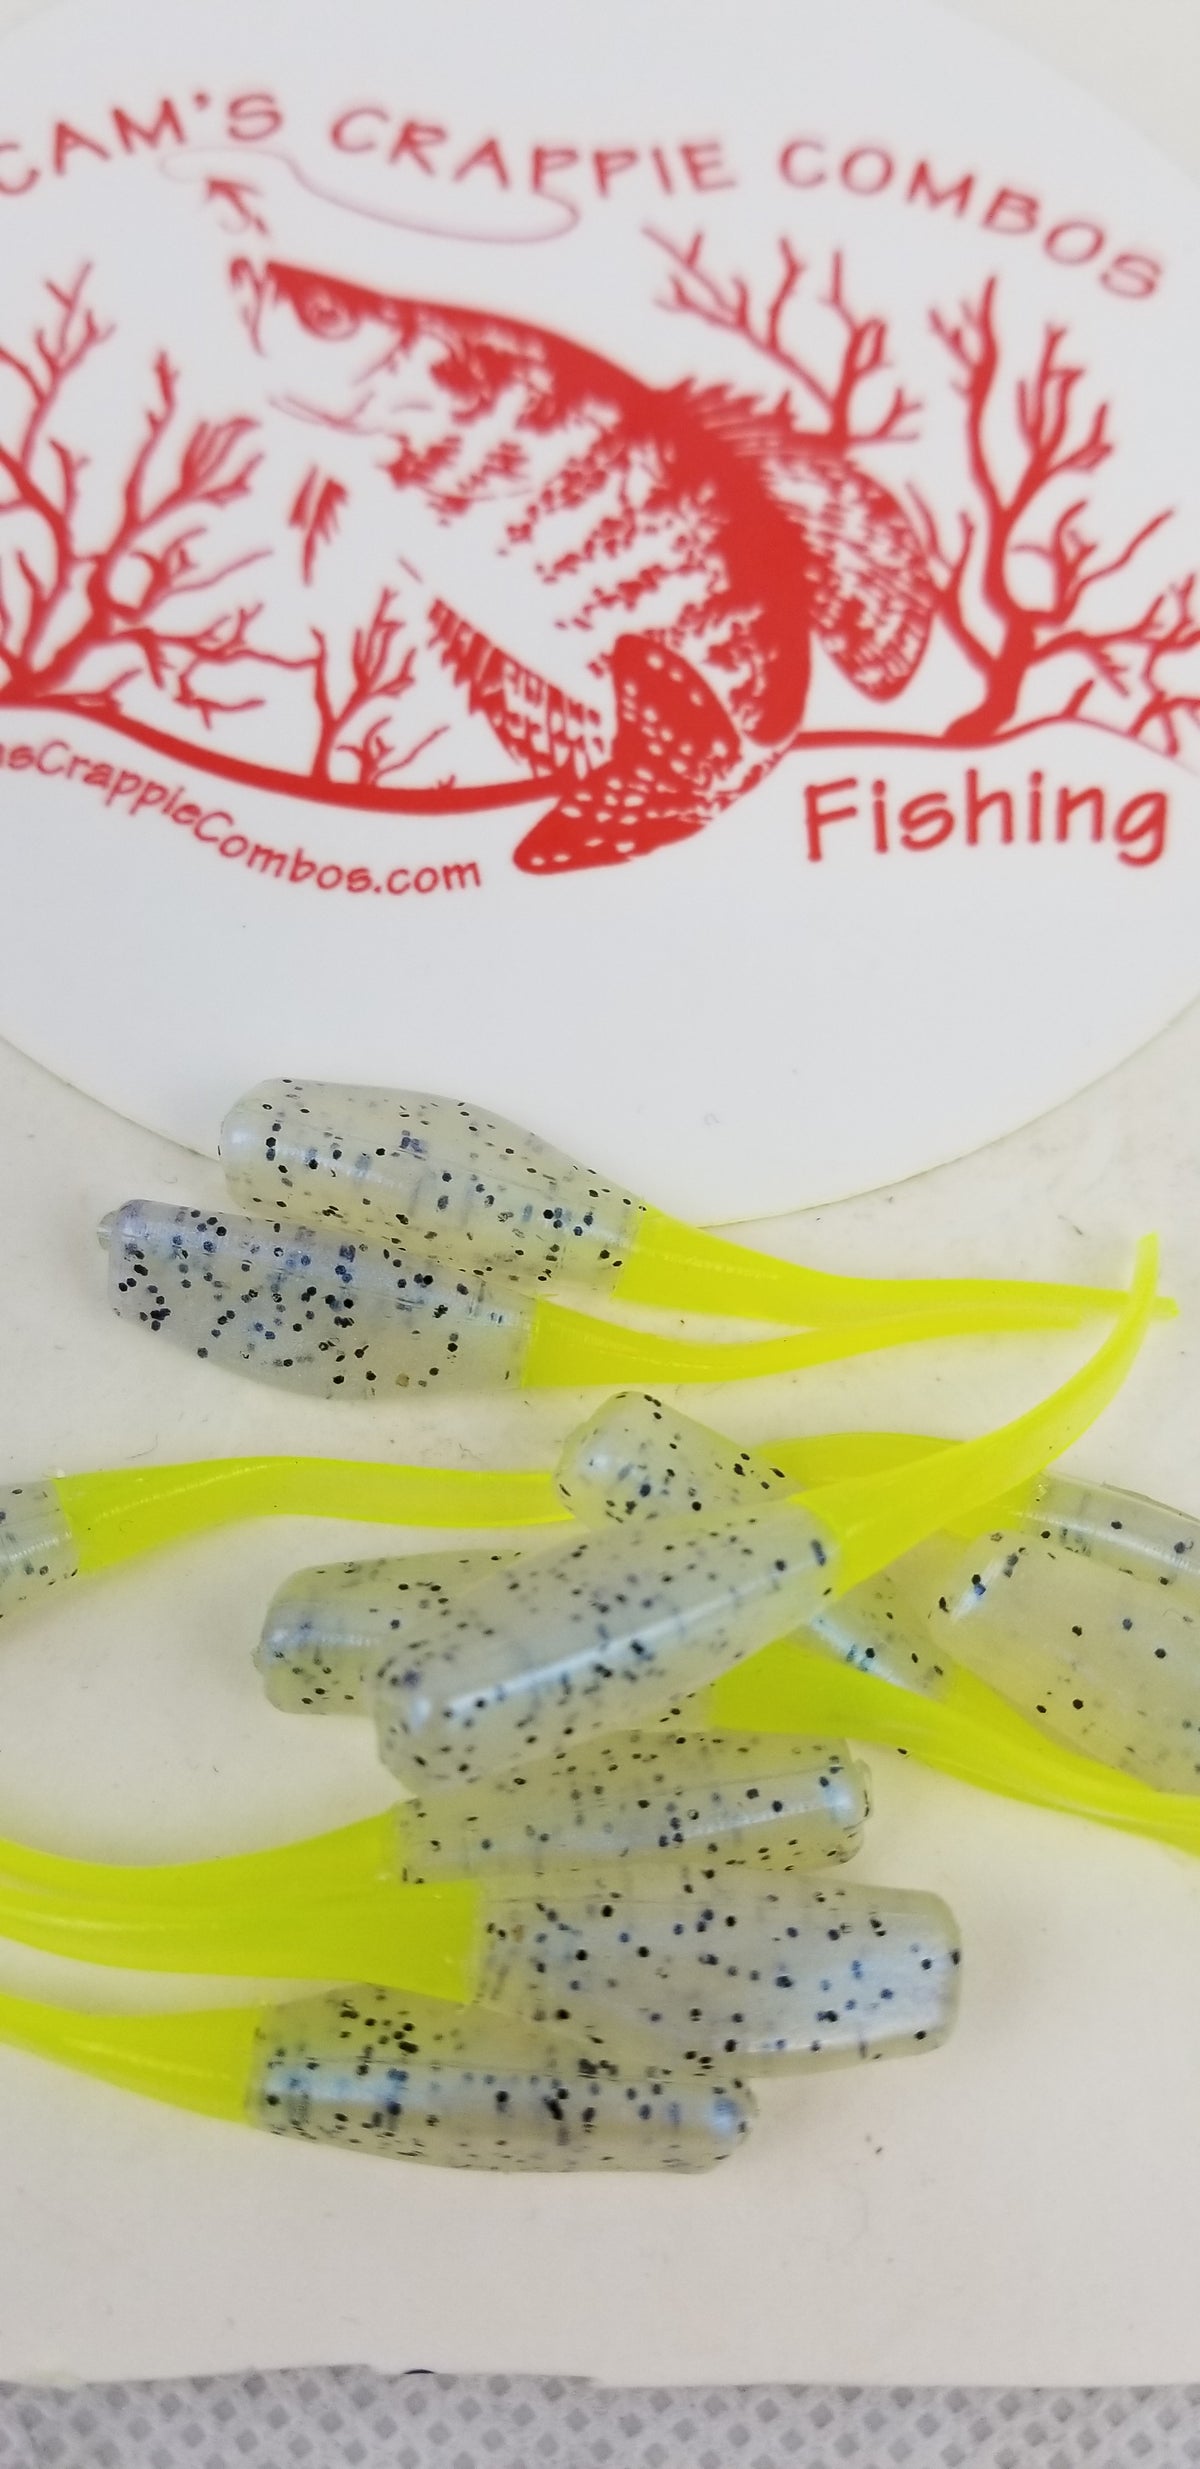 Cam's 2"(HOLOGRAM FLAKE)  STINGER SHAD 100pc MONKEY MILK & CHARTREUSE Crappie Soft Jigs [A Cam's Exclusive]